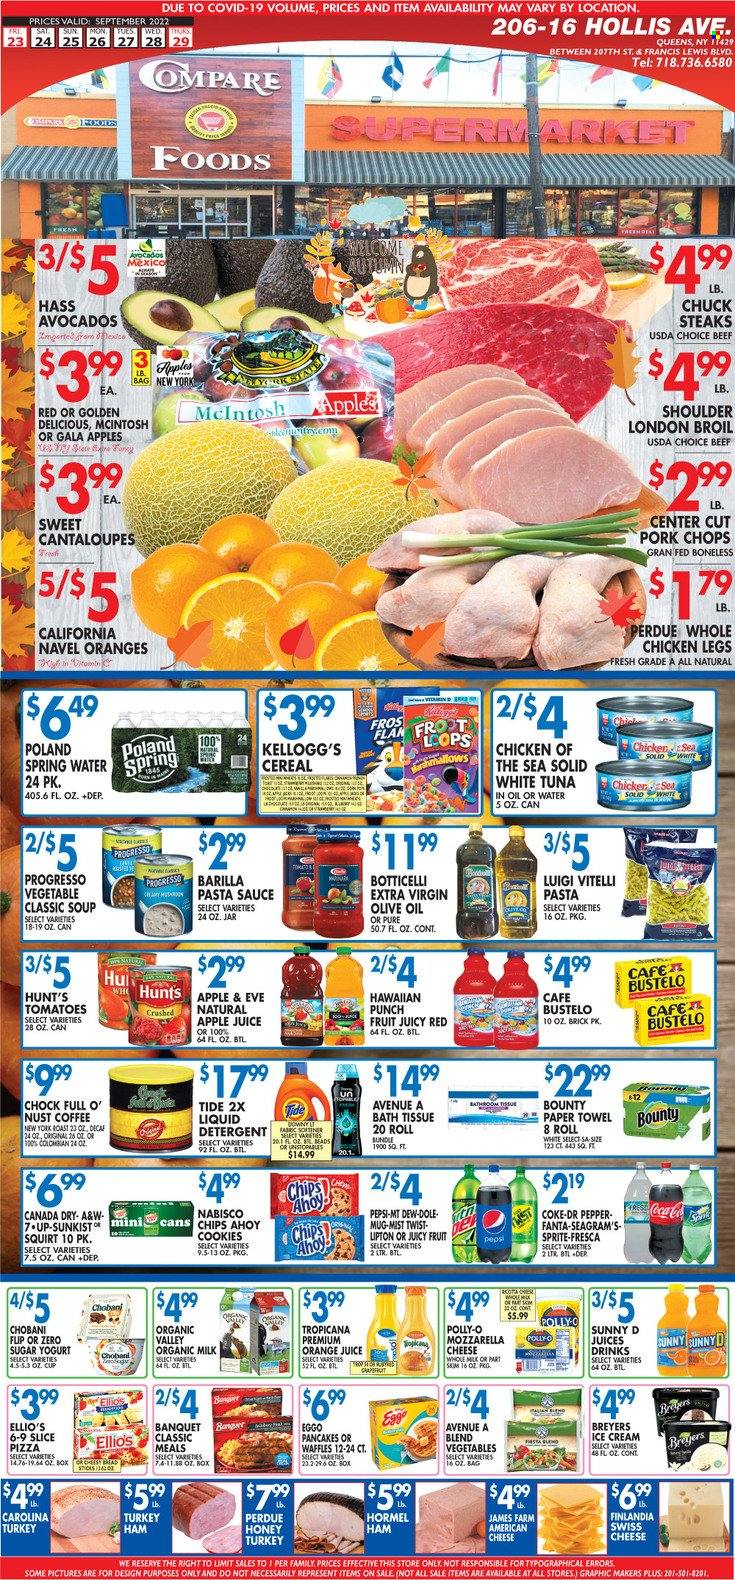 thumbnail - Compare Foods Flyer - 09/23/2022 - 09/29/2022 - Sales products - waffles, cantaloupe, Dole, avocado, Gala, Golden Delicious, tuna, pizza, pasta sauce, soup, sauce, Barilla, Progresso, Perdue®, Hormel, ham, american cheese, swiss cheese, yoghurt, Chobani, organic milk, ice cream, cookies, Bounty, Kellogg's, bread sticks, chips, Chicken of the Sea, cereals, extra virgin olive oil, olive oil, honey, apple juice, Canada Dry, Coca-Cola, Sprite, Pepsi, orange juice, juice, Fanta, Lipton, Dr. Pepper, 7UP, A&W, spring water, coffee, whole chicken, chicken legs, steak, pork chops, pork meat, navel oranges. Page 1.